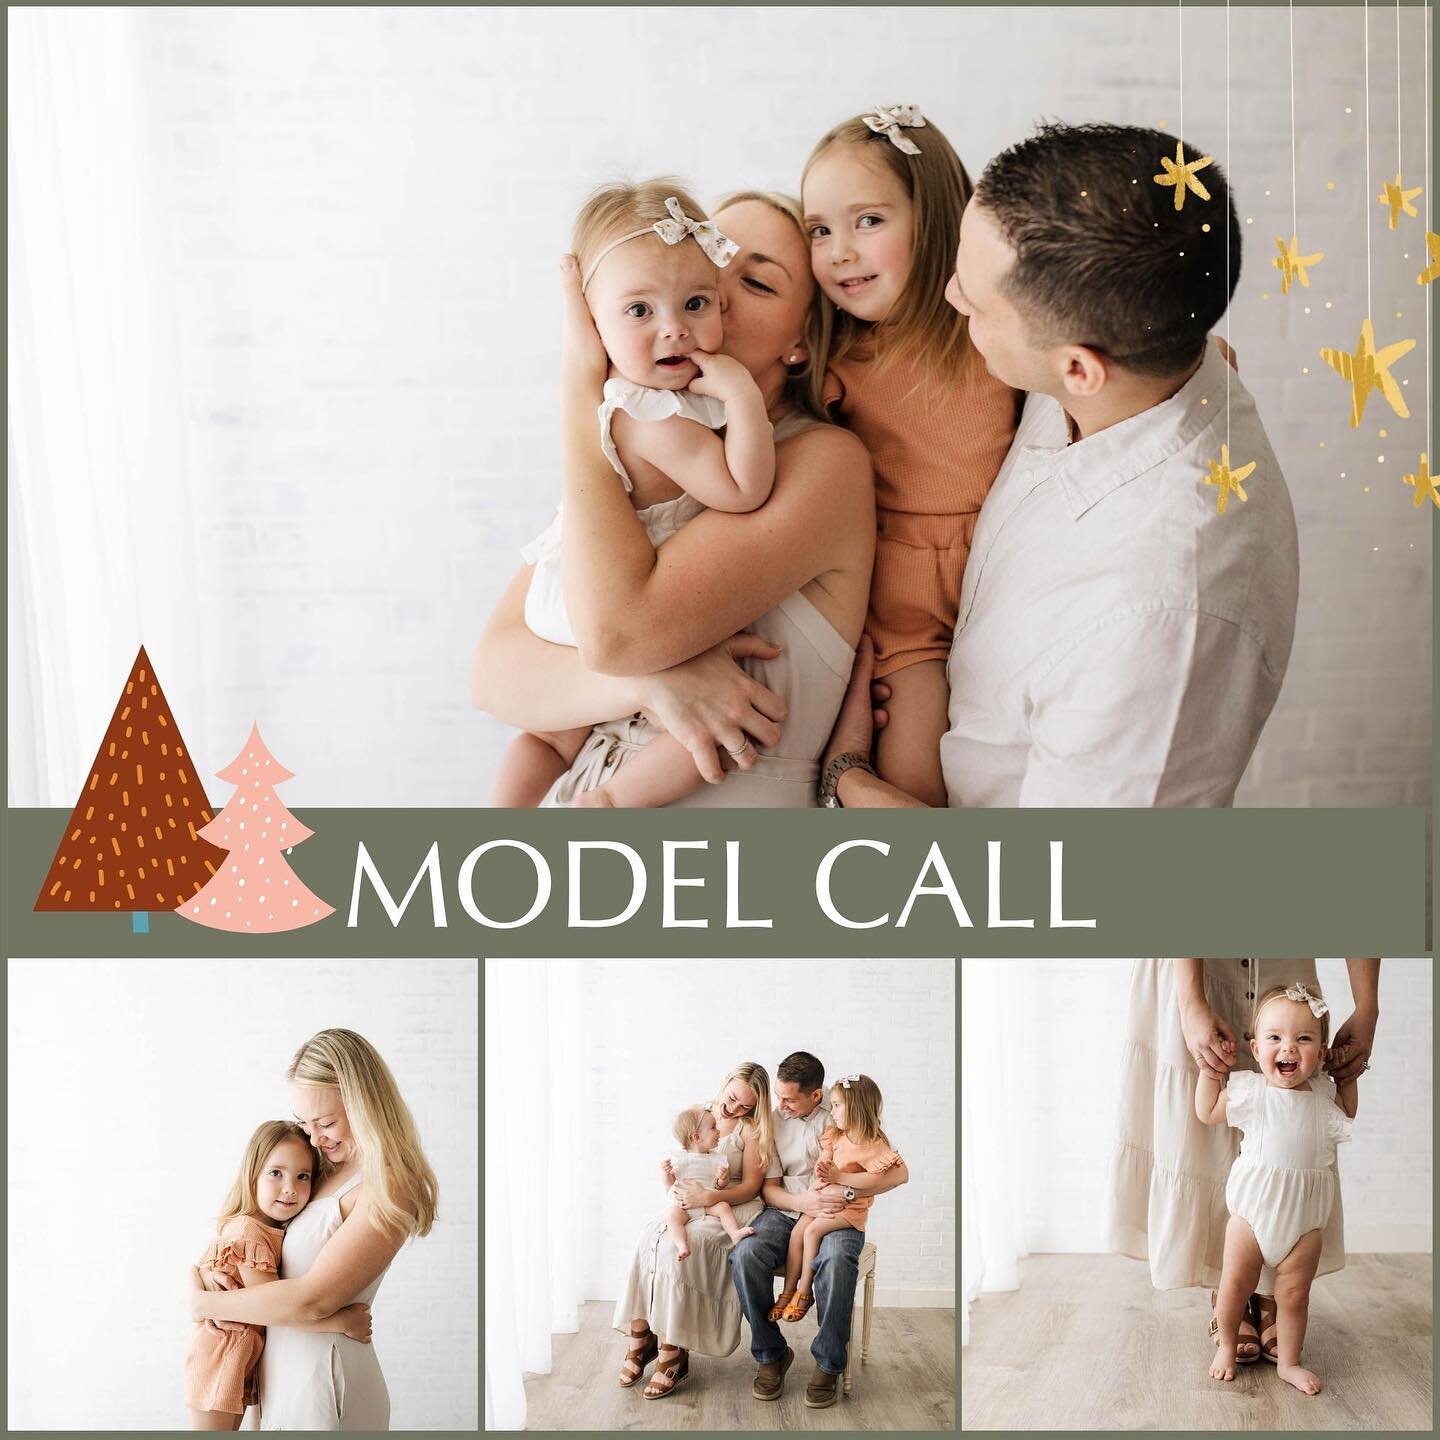 I&rsquo;m looking for a fun-loving family to model my Christmas Studio set for me! 

✨ 2 adults + 1-2 kids aged 5 &amp; under
✨ Willing to collaborate on styling/outfits
✨ Available next weekend 😊

You&rsquo;ll get a free Christmas-themed photoshoot